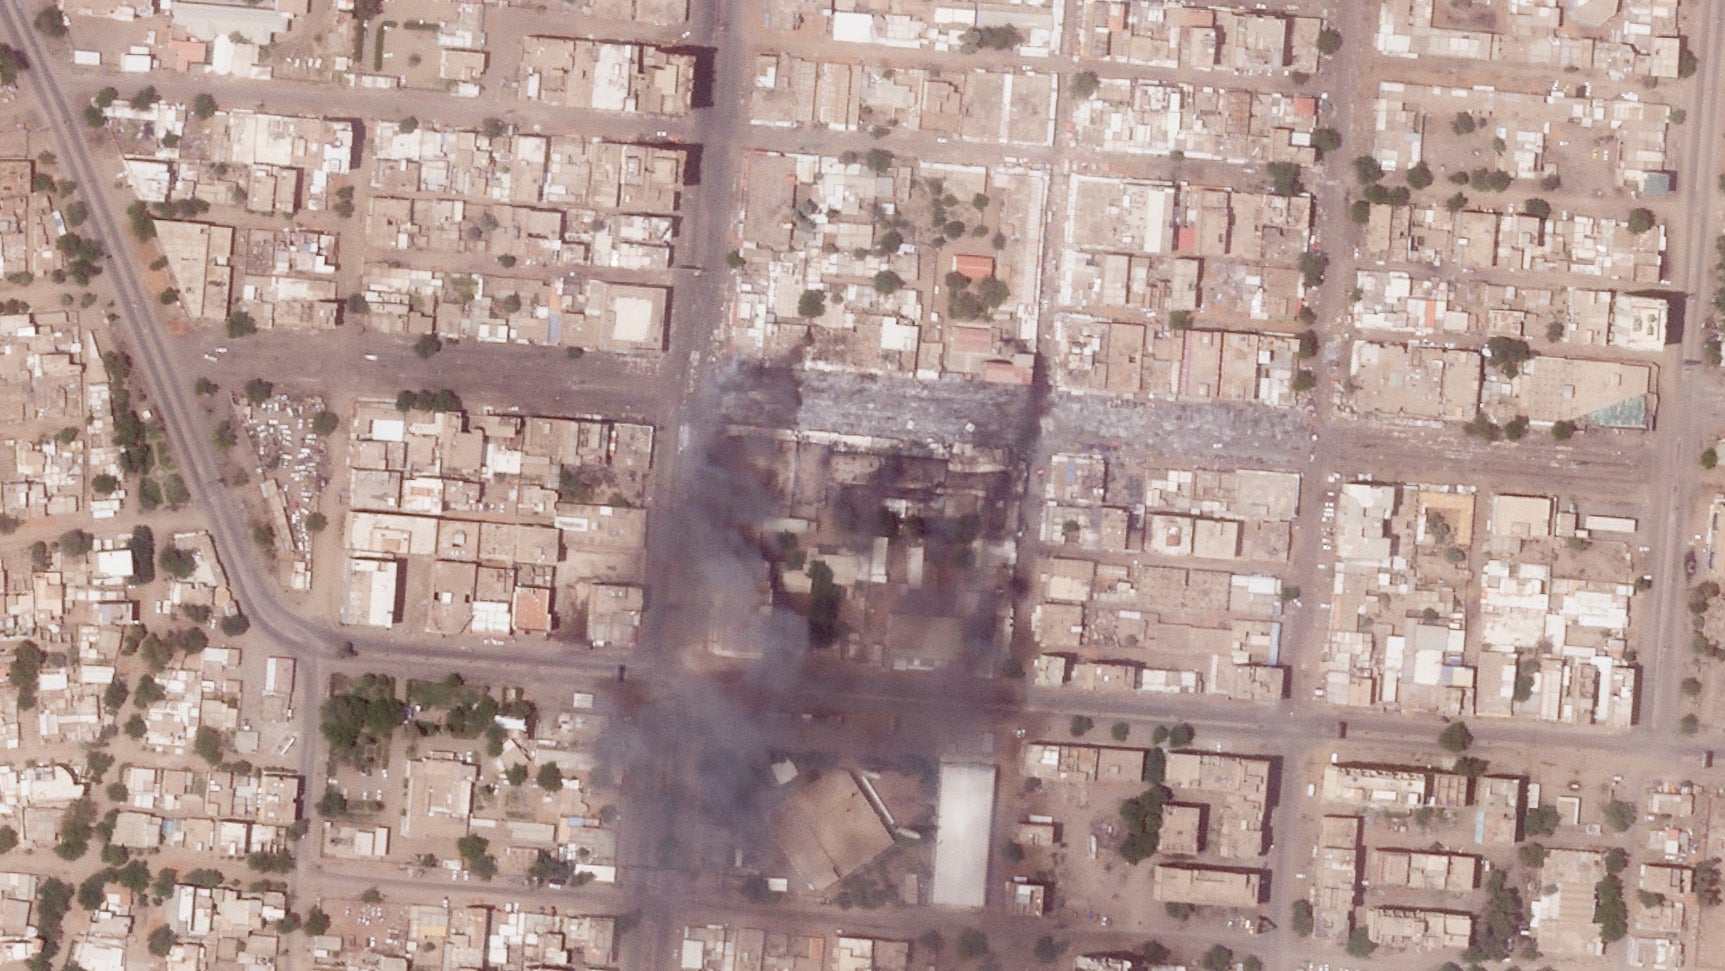 Destroyed market stalls in a commercial area of northern Khartoum